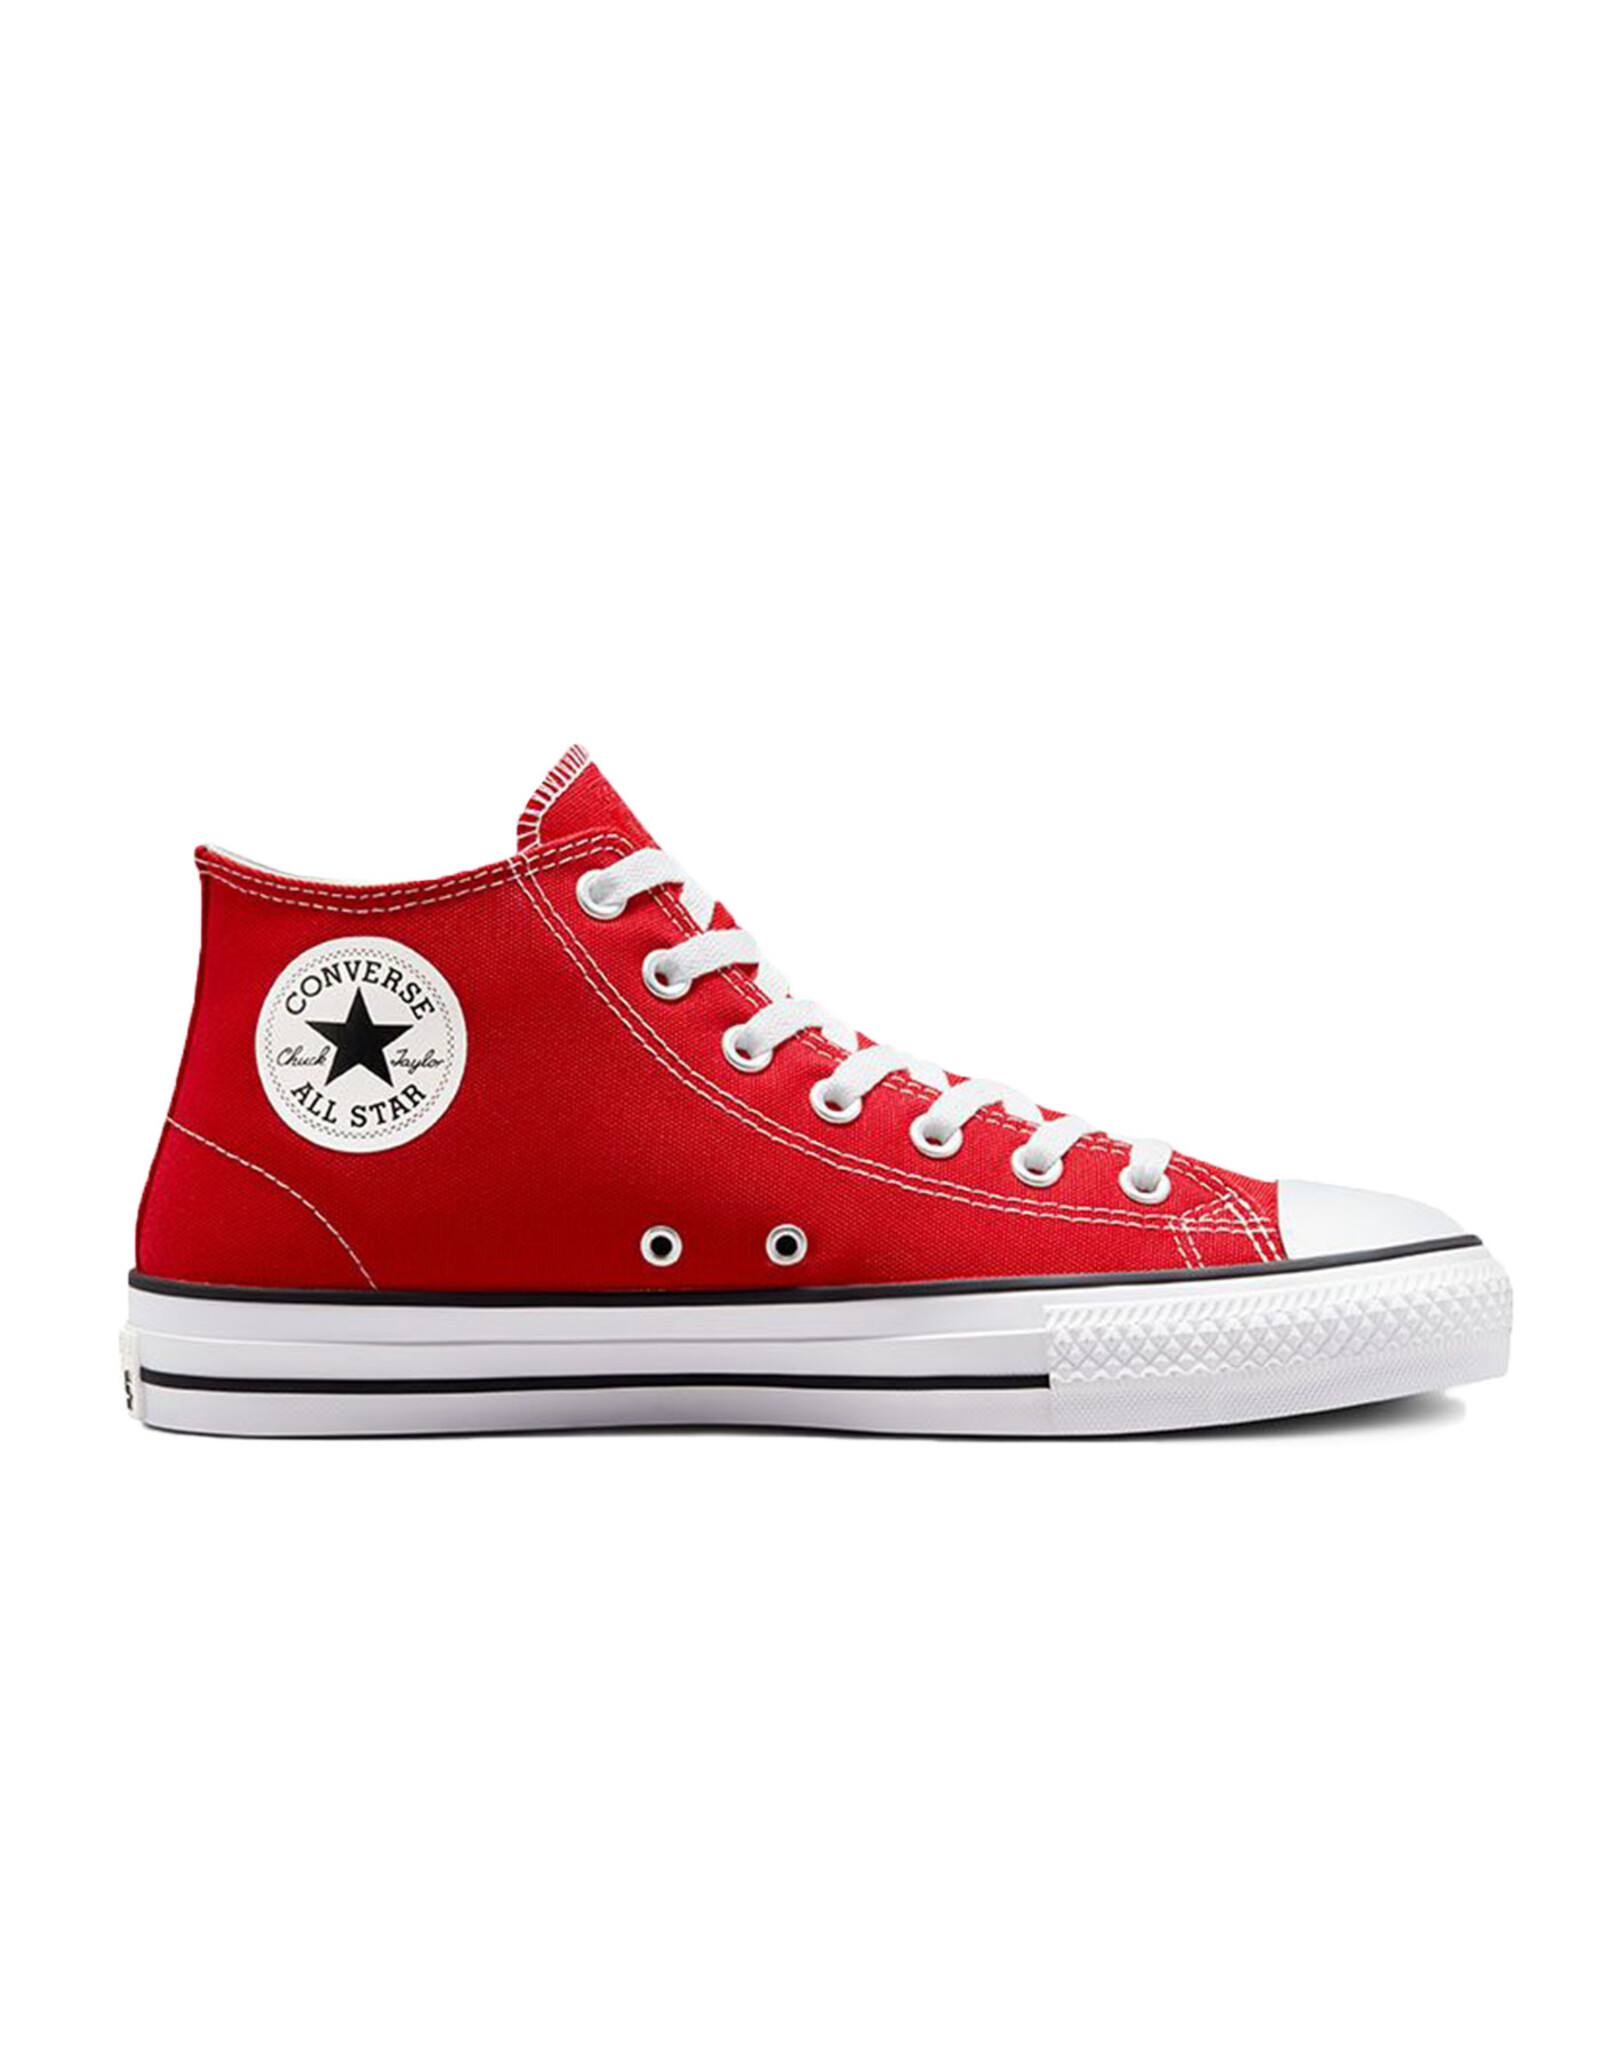 CONS CHUCK TAYLOR ALL STAR PRO UNIVERSITY RED/WHITE/BLACK C398CR - A02934C